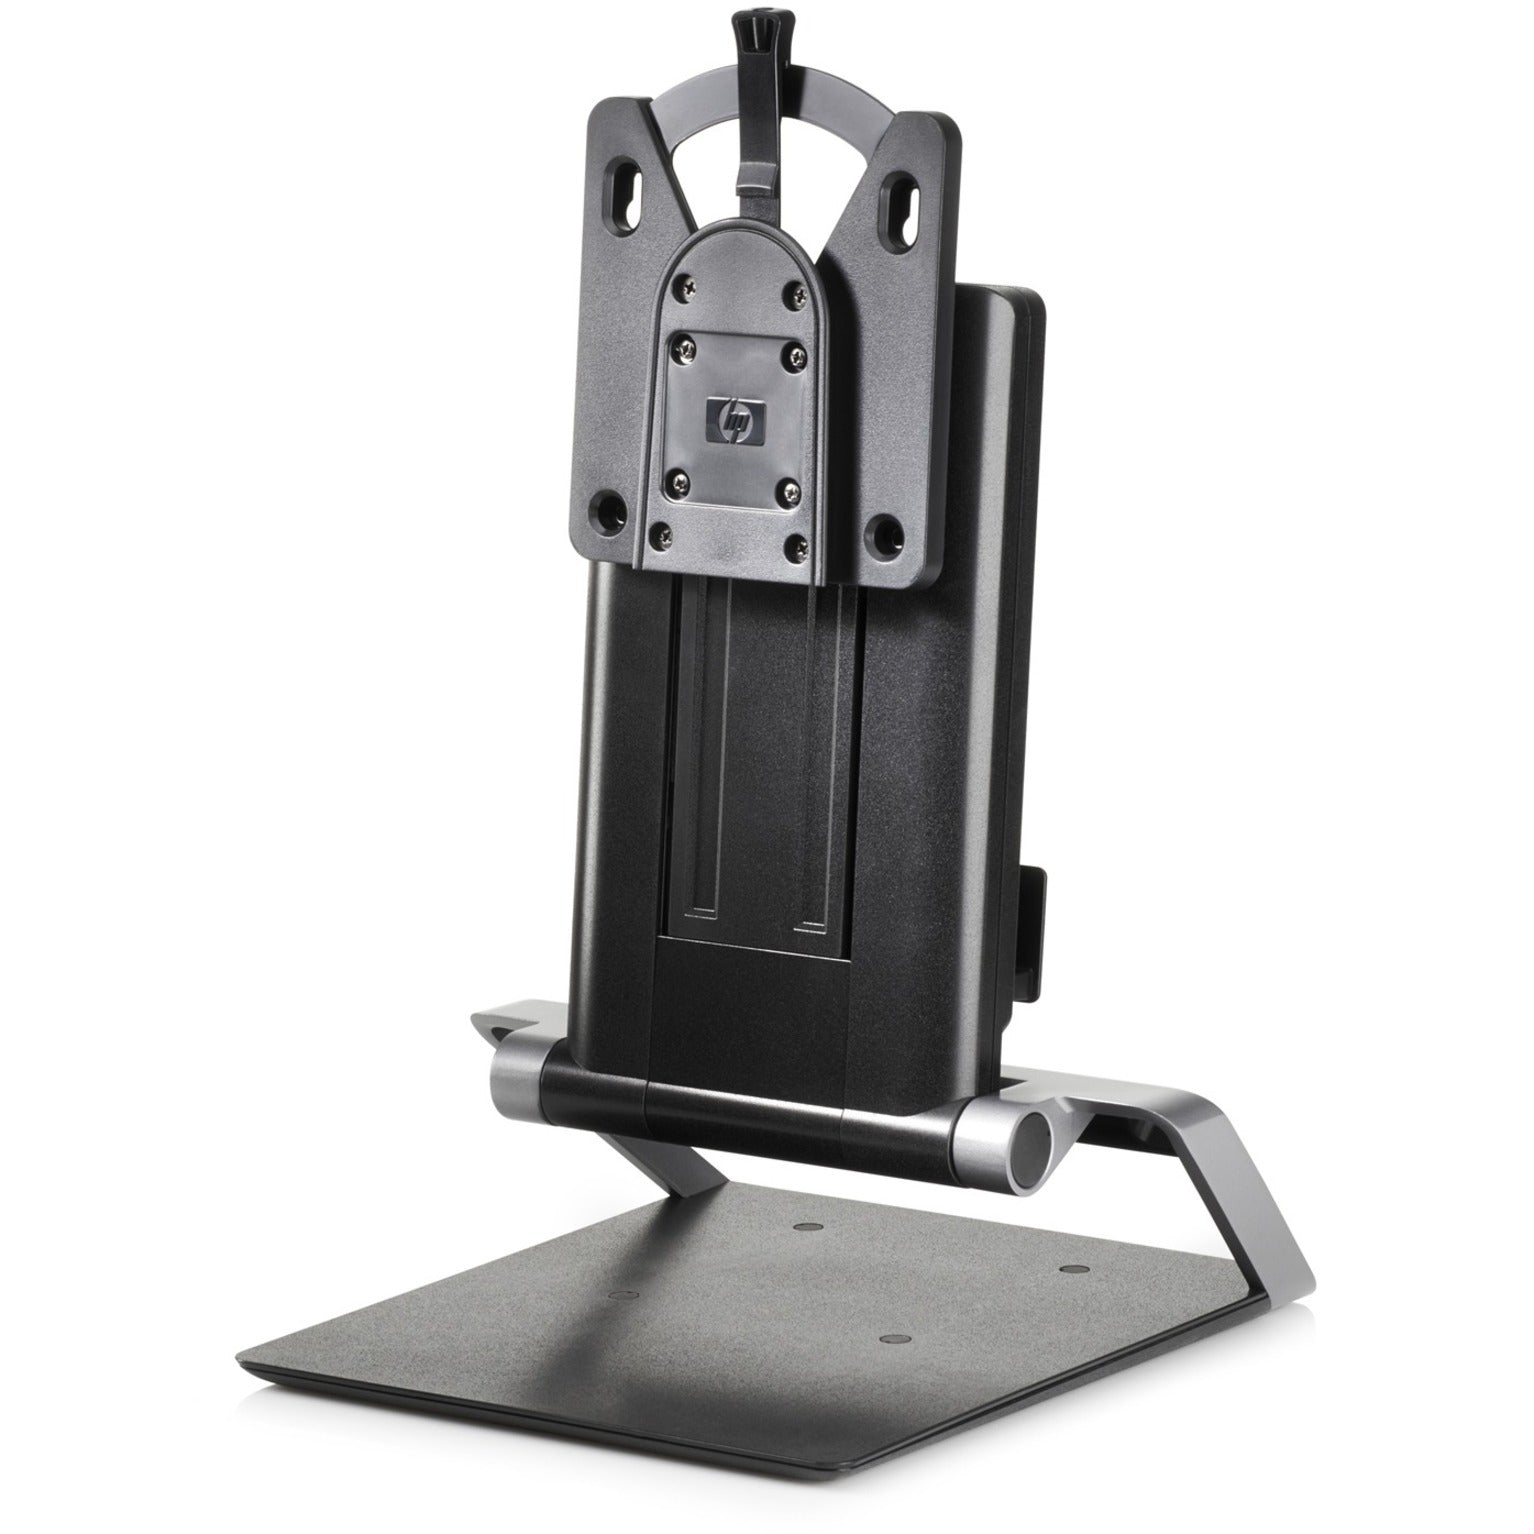 HP IWC Desktop Mini/TC - Computer Stand with Tilt, Swivel, and Rotate [Discontinued]